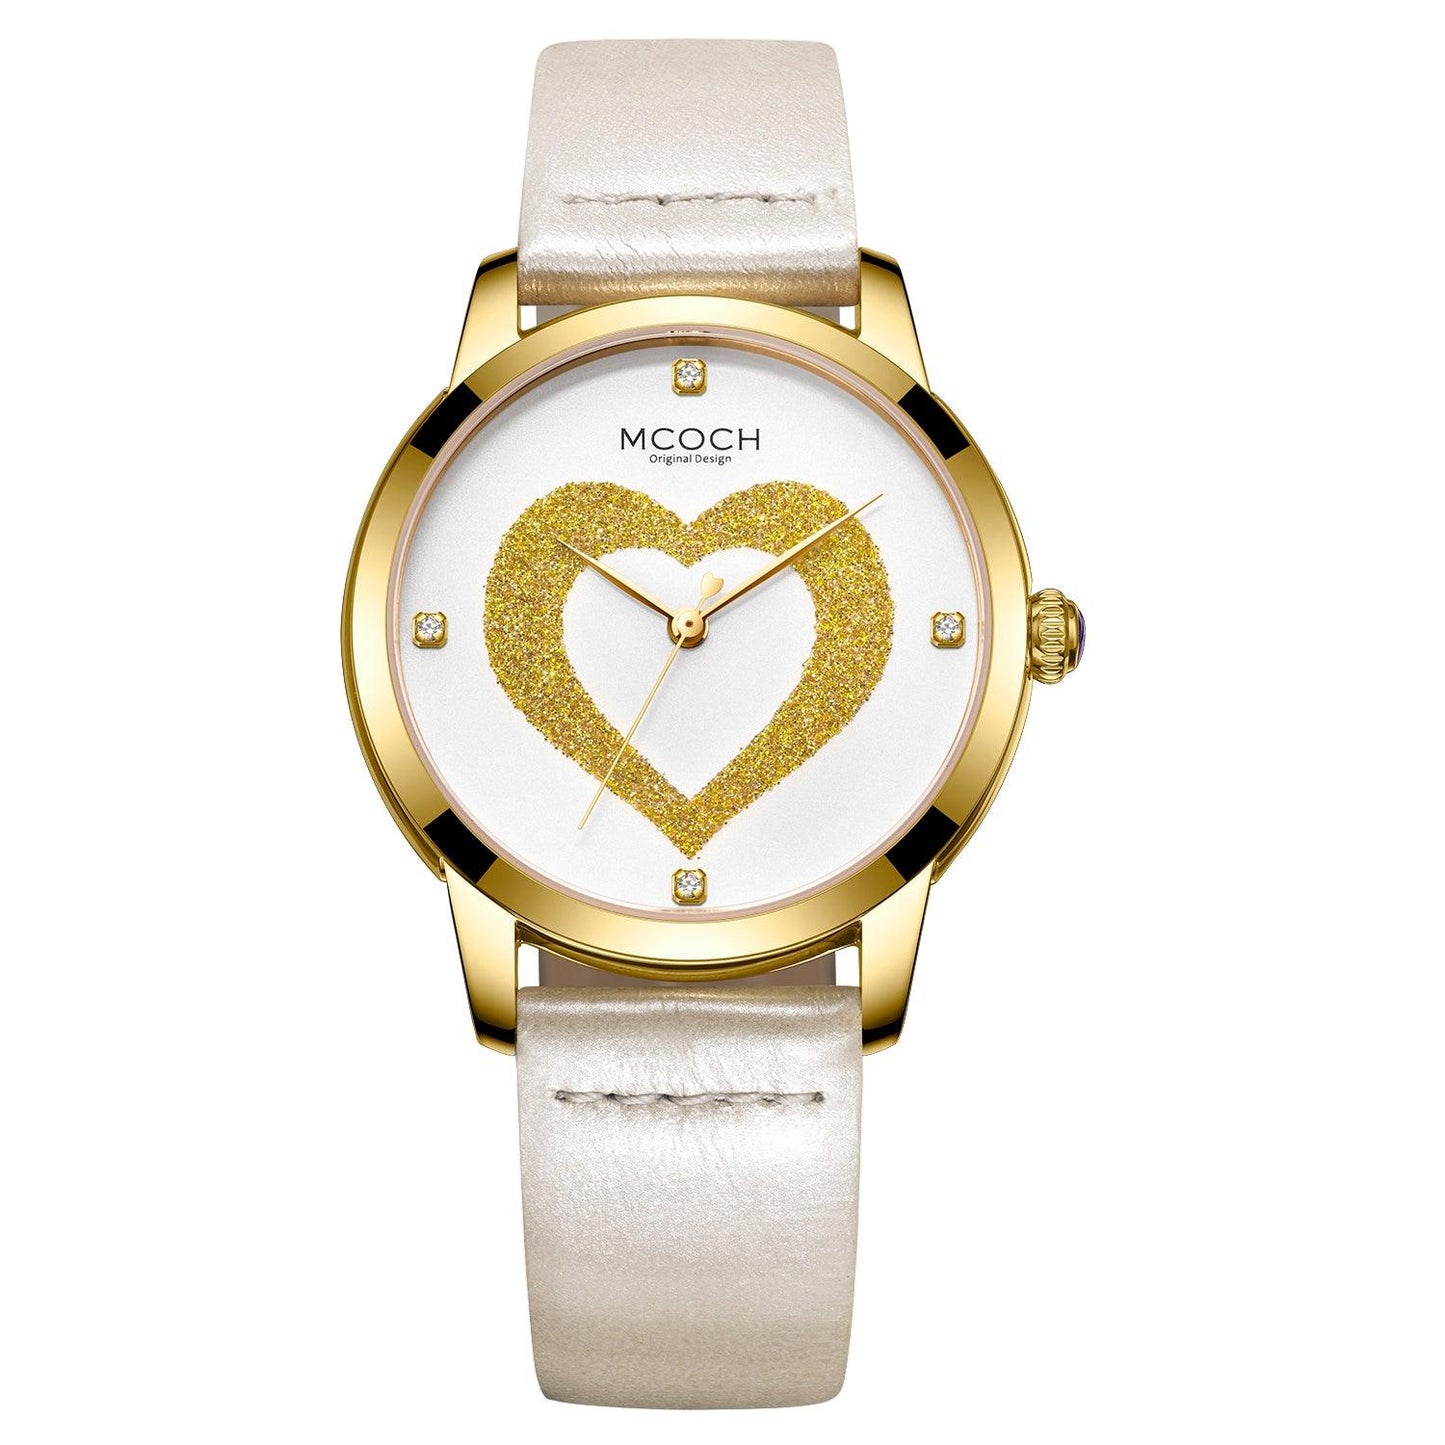 NBCP personality design heart-shaped dial simple watch - NBCP Watch